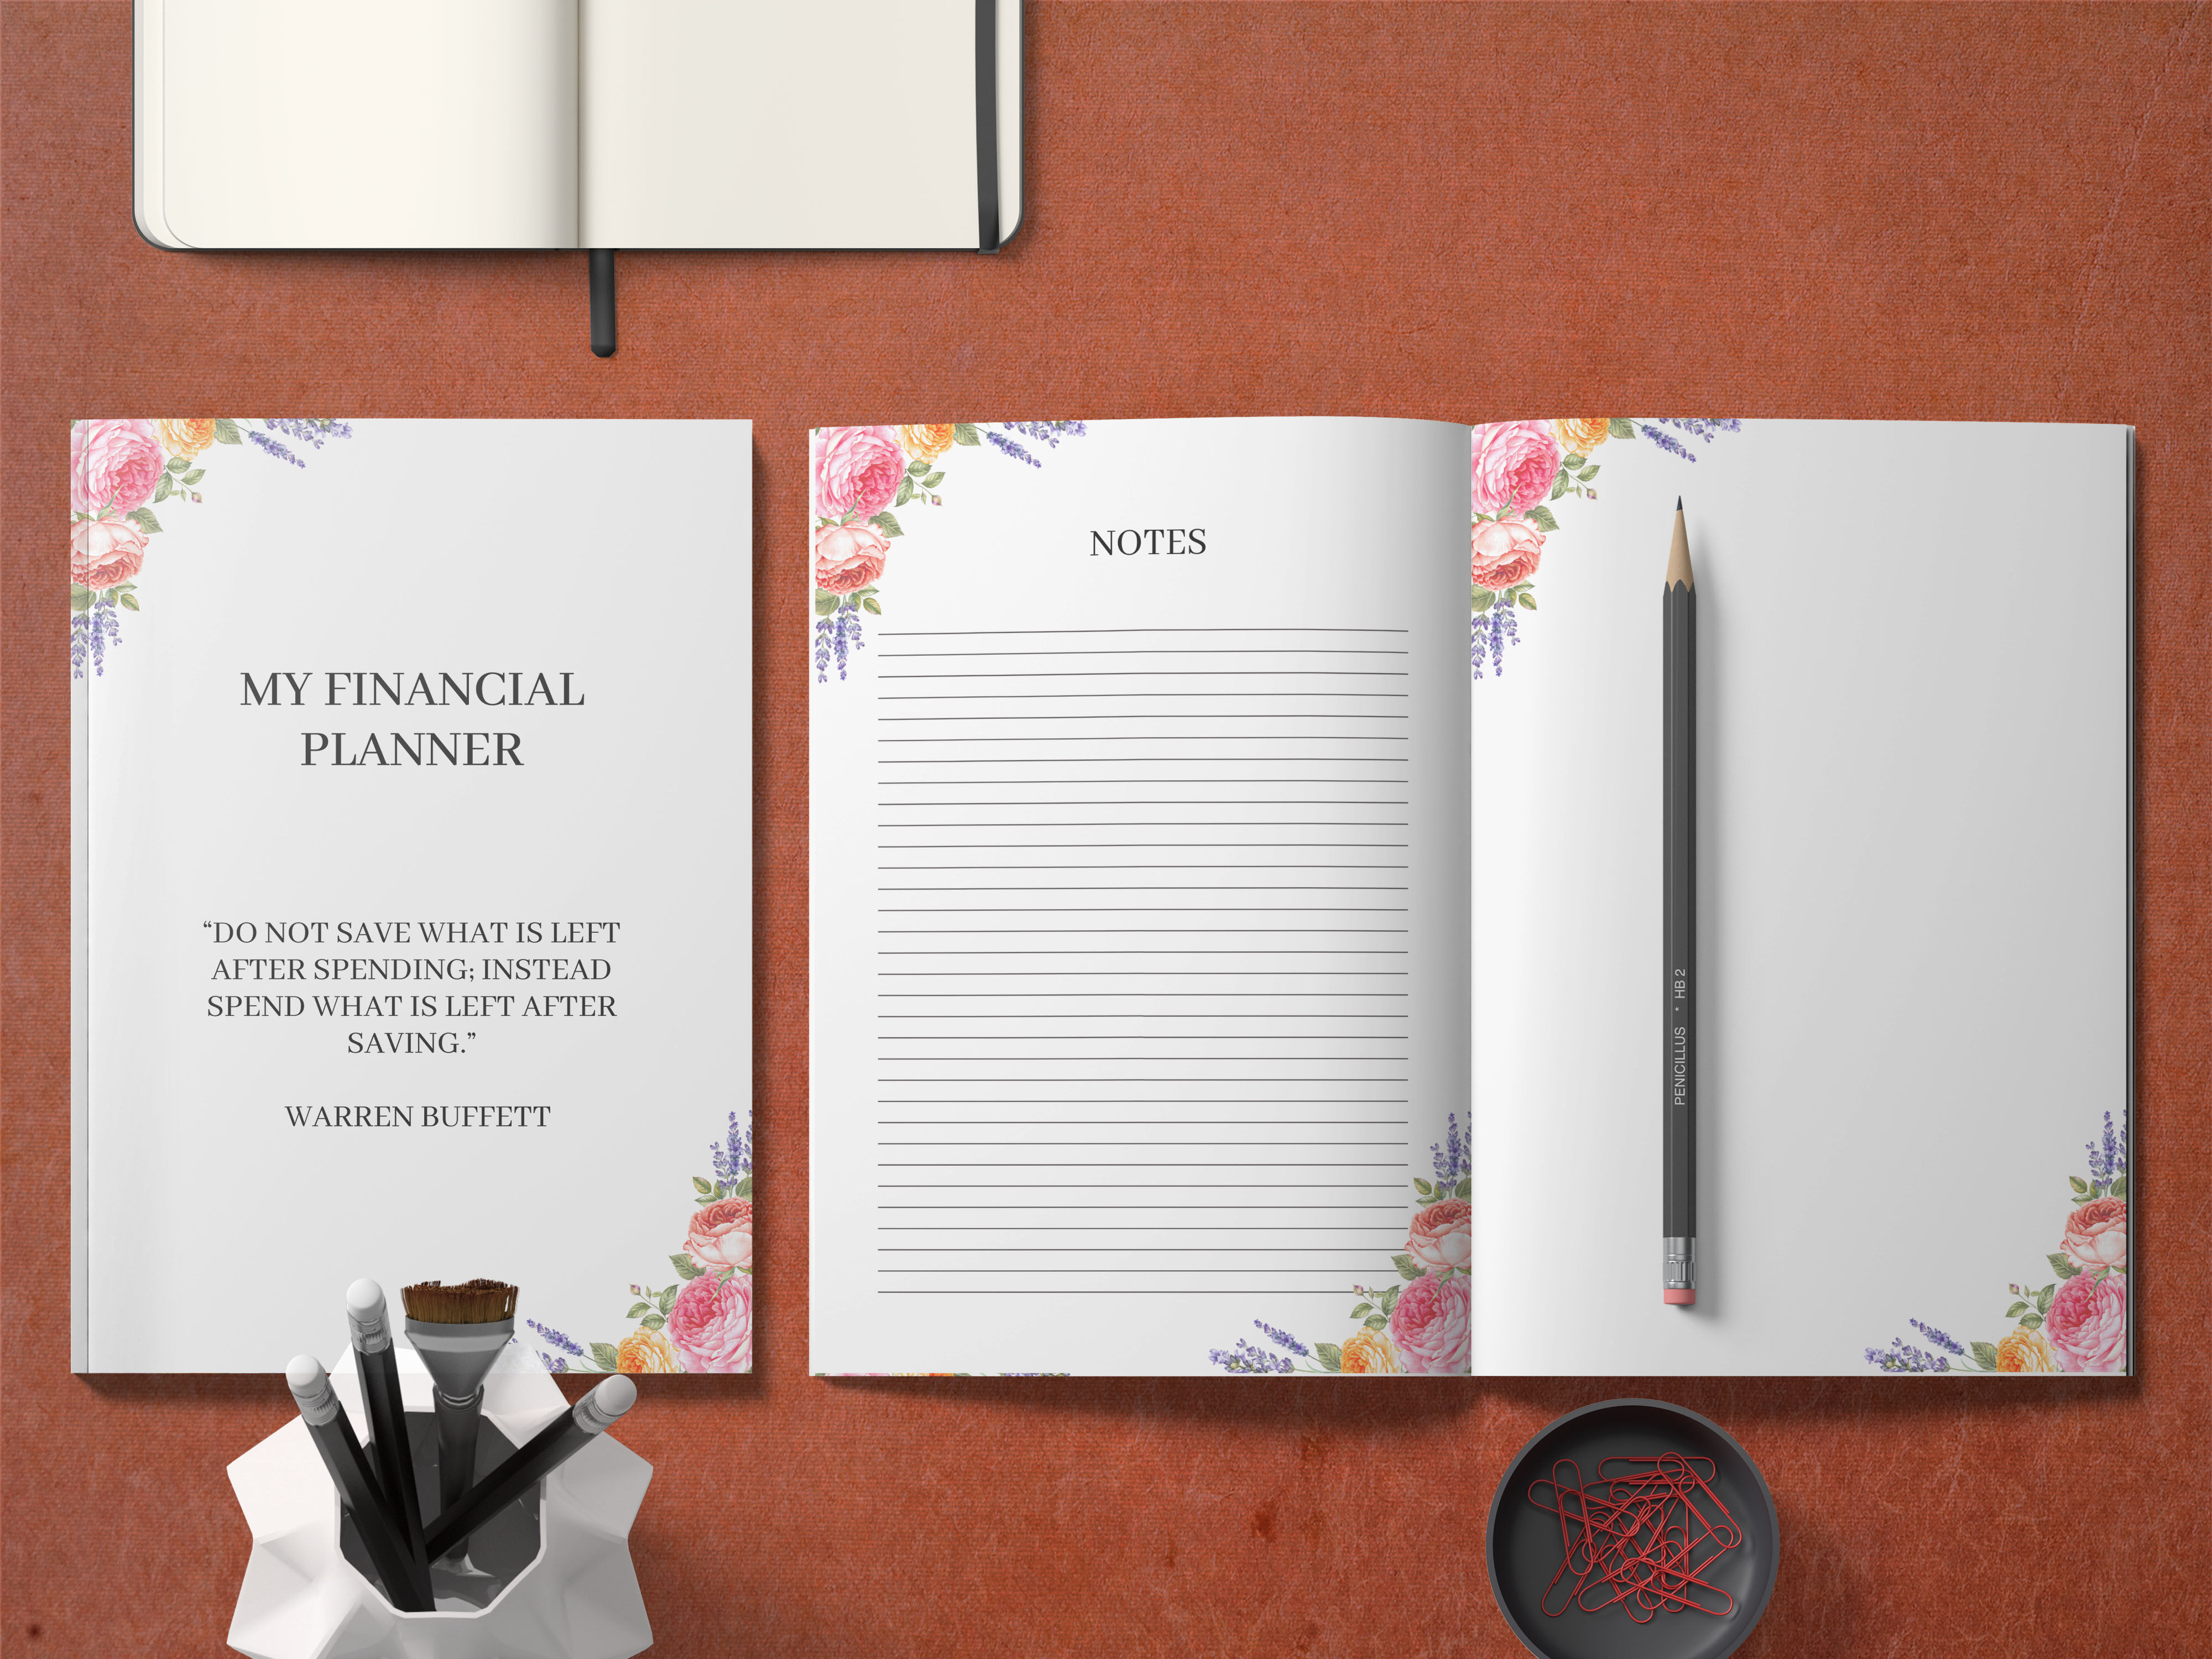 Finance Planner Inserts Budget Planner Finance Planner Debt Expens By Old Continent Design Thehungryjpeg Com